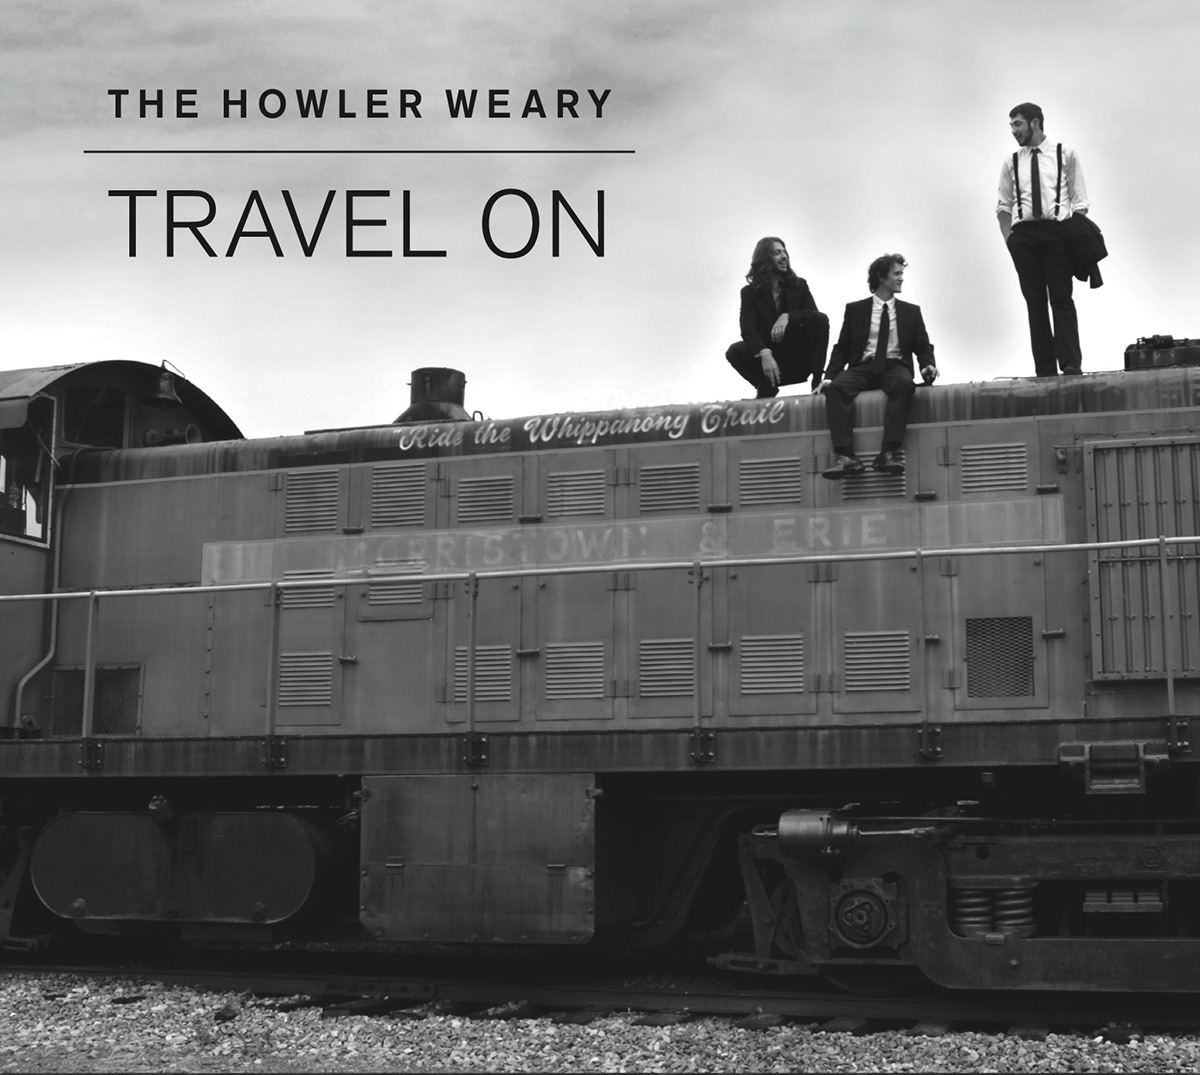 cd howler weary band Rock And Roll travel on Album trains tracks